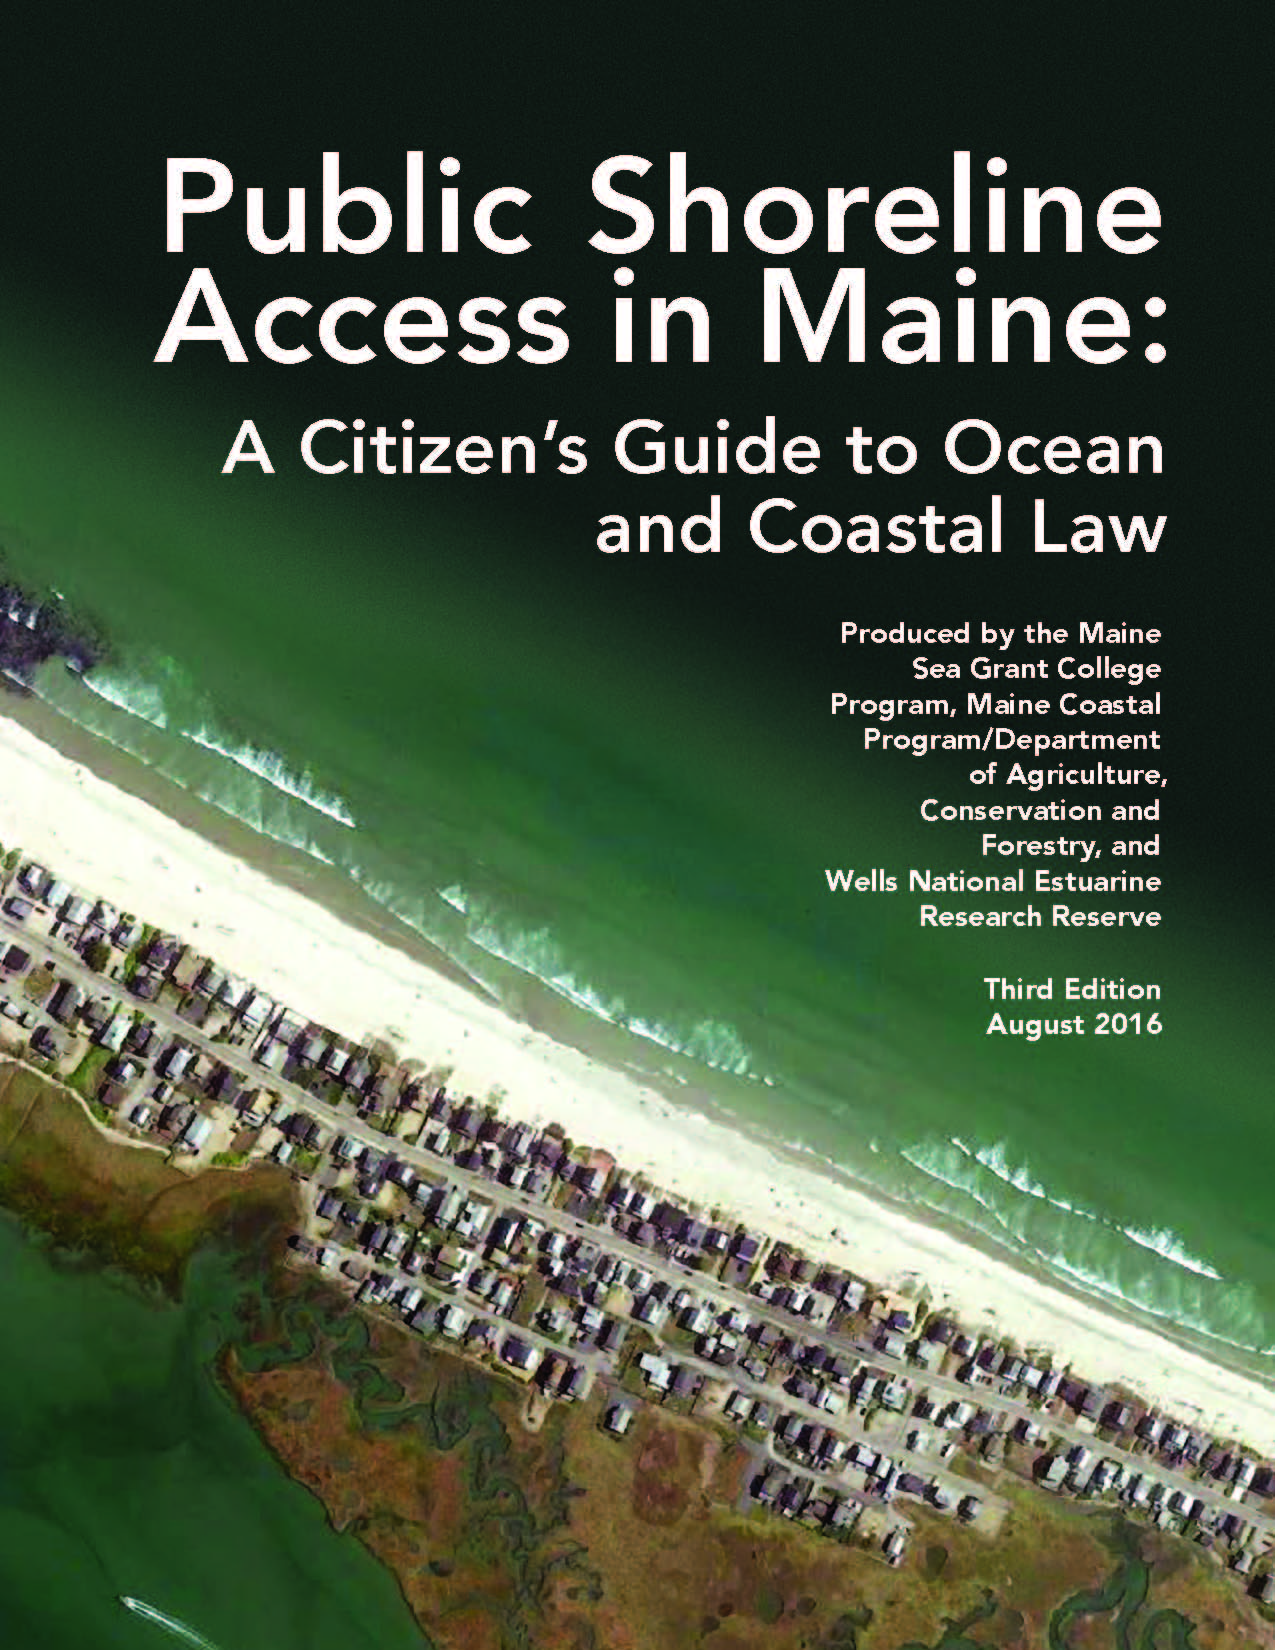 photo of the cover of the Public Shoreline Access in Maine publication